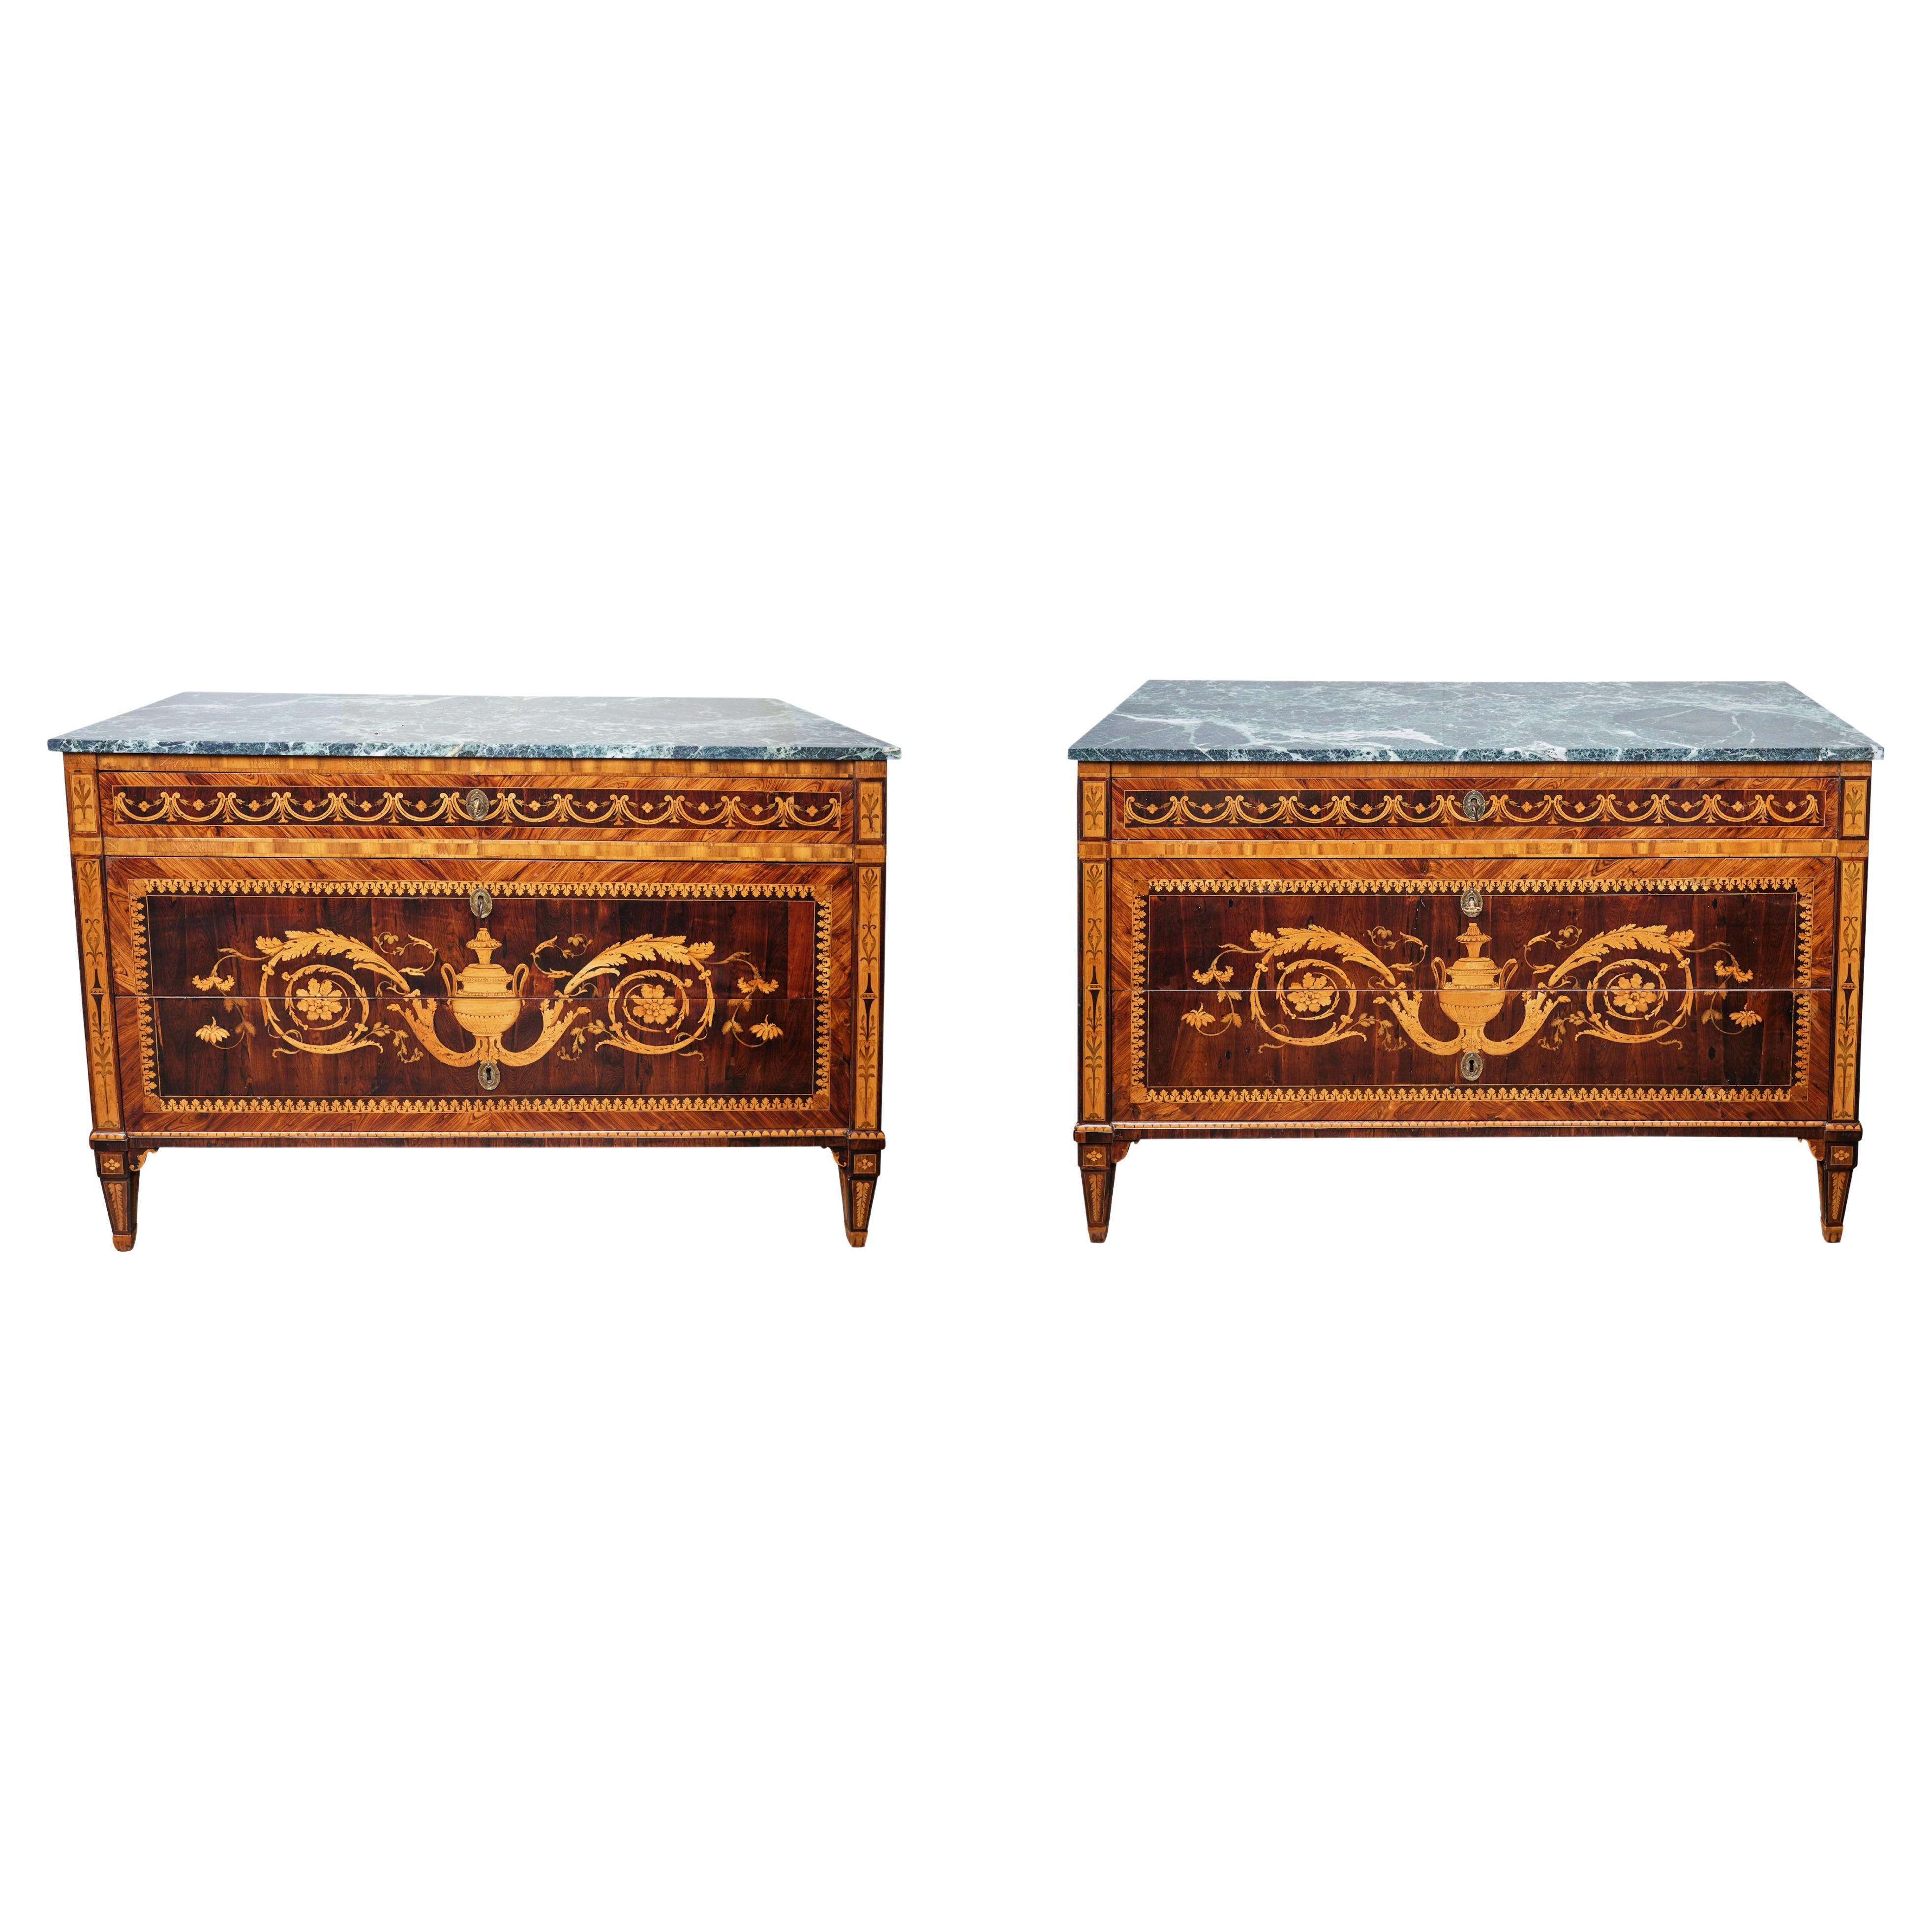 Fine Pair of Inlaid Marble Top Commodes For Sale